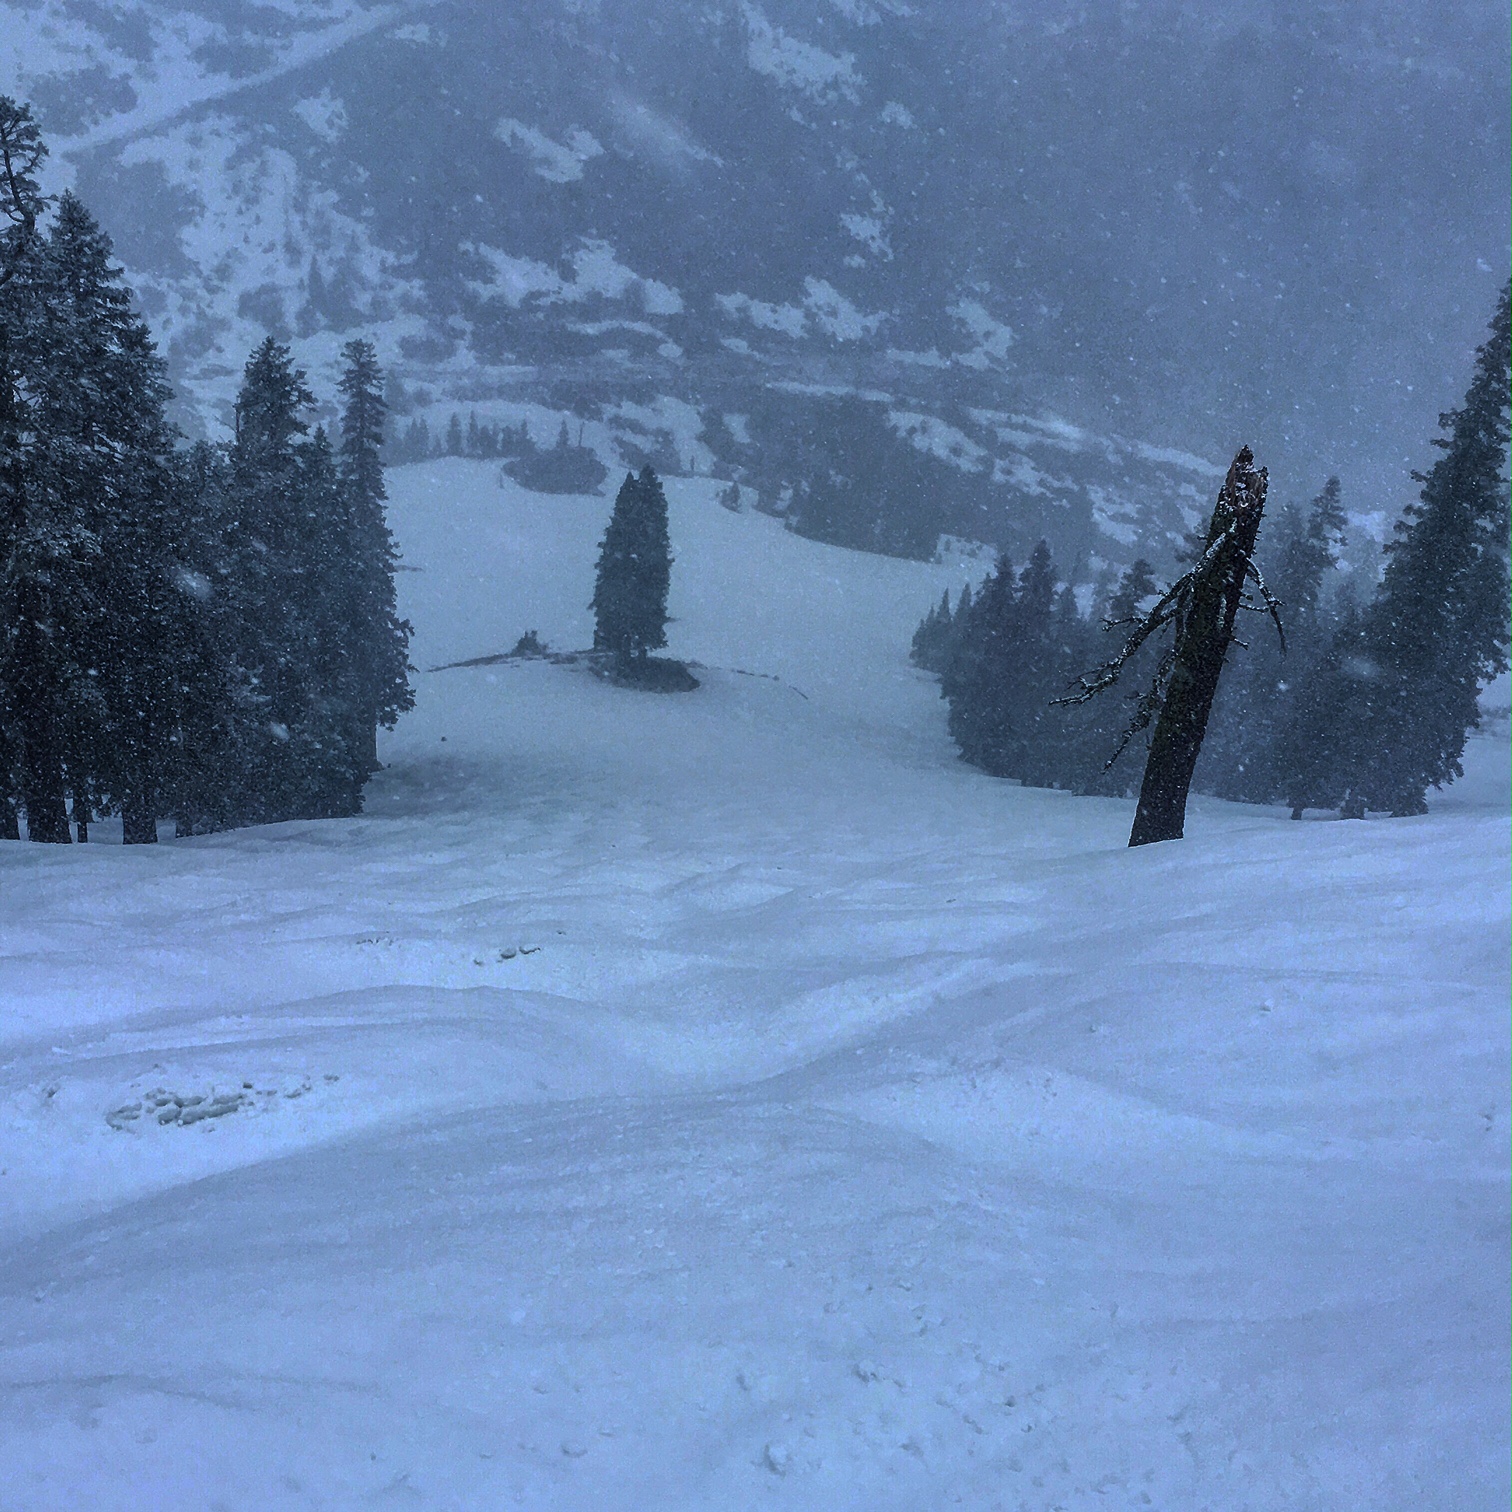 West Face at Squaw at 10am today. photo: yimmers/snowbrains